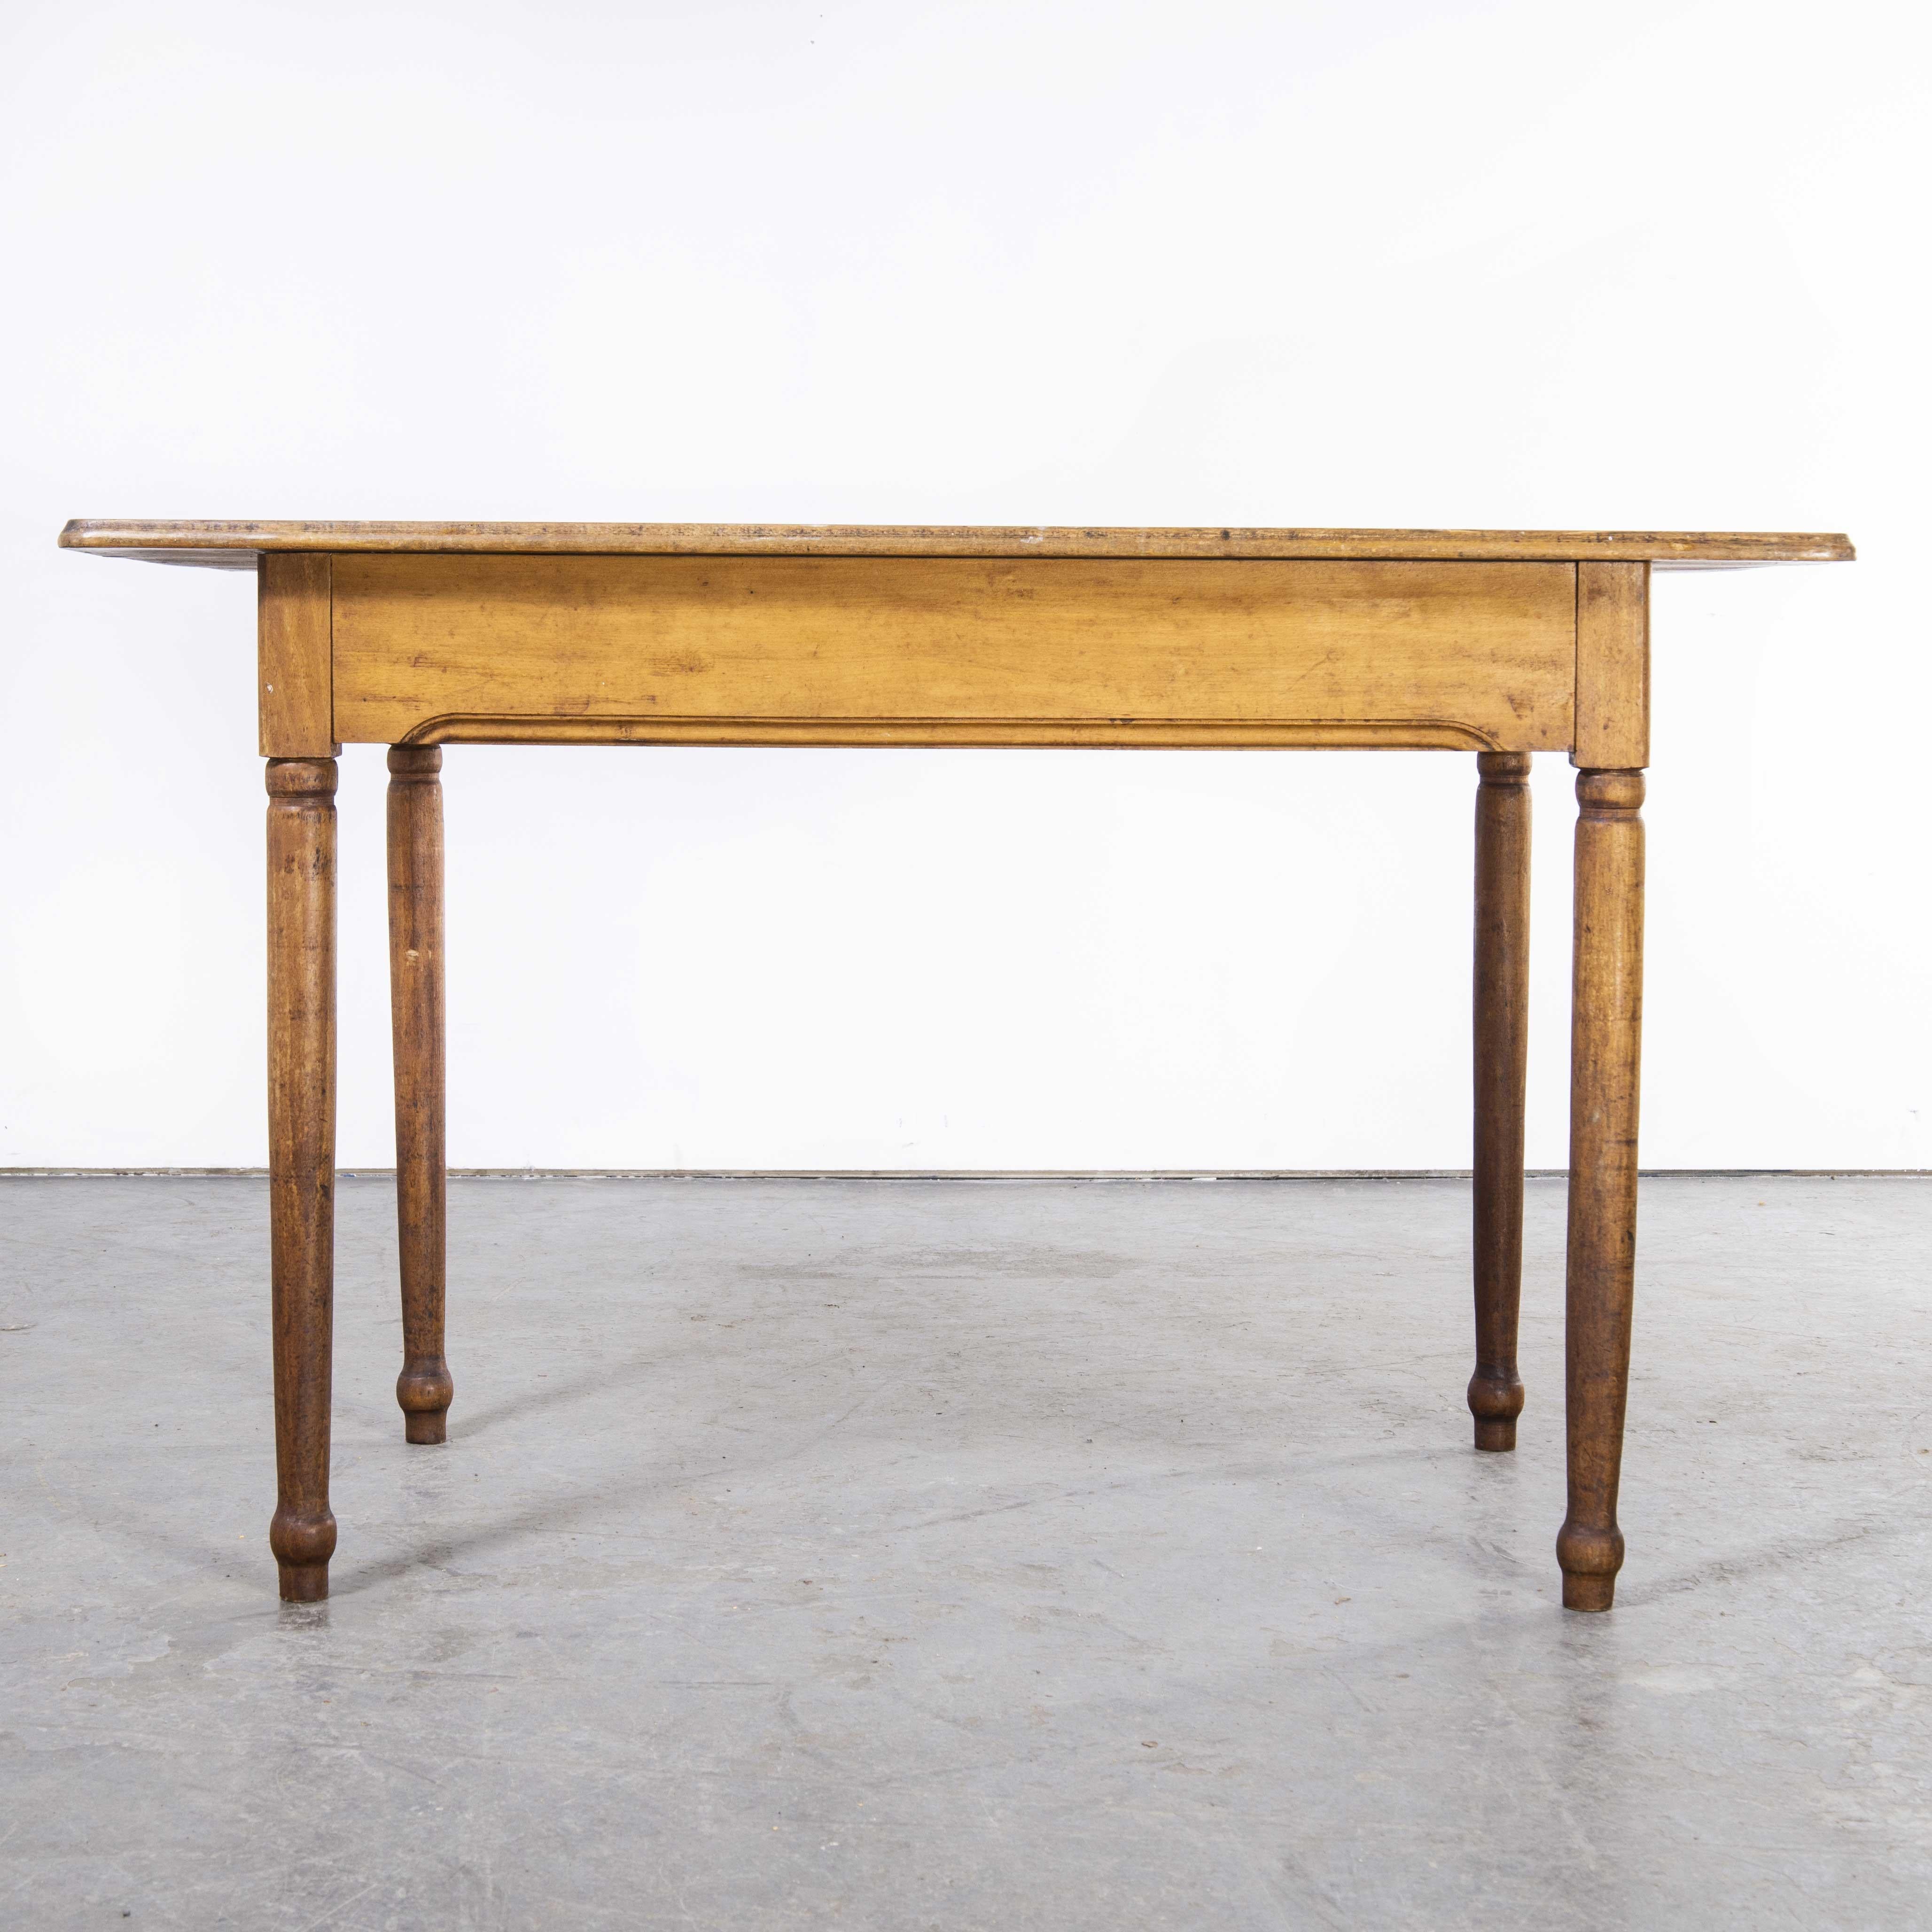 1950’s French fruitwood rectangular dining table (1606.5)
1950’s French fruitwood rectangular dining table (1606.5). Very simple but beautiful French dining table, originally we sourced several tables from a small Caf? outside Lyon. The tables are